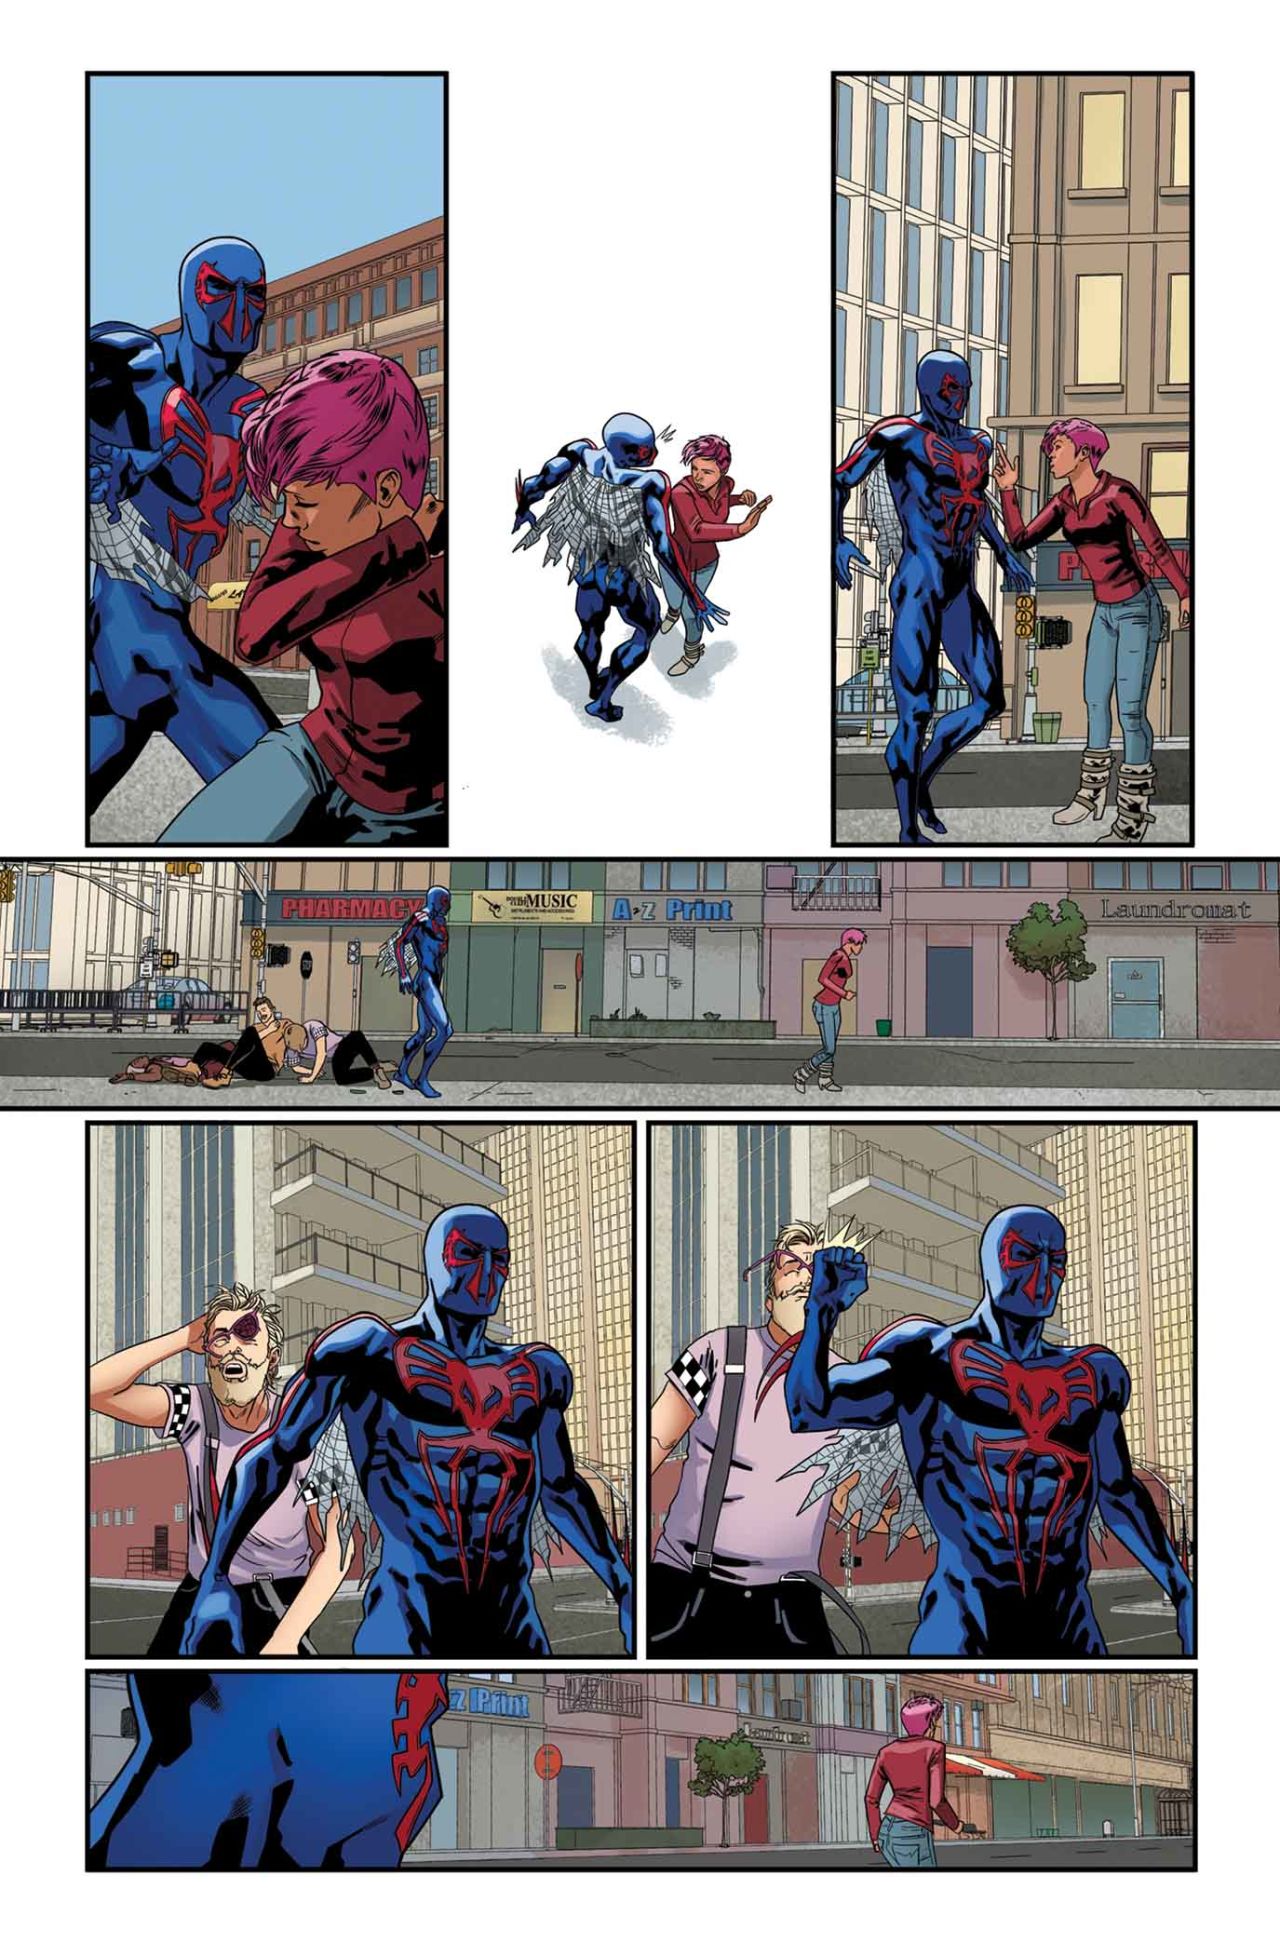 One more look at the "Spider-Man 2099" story in "Amazing Spider-Man" #1.